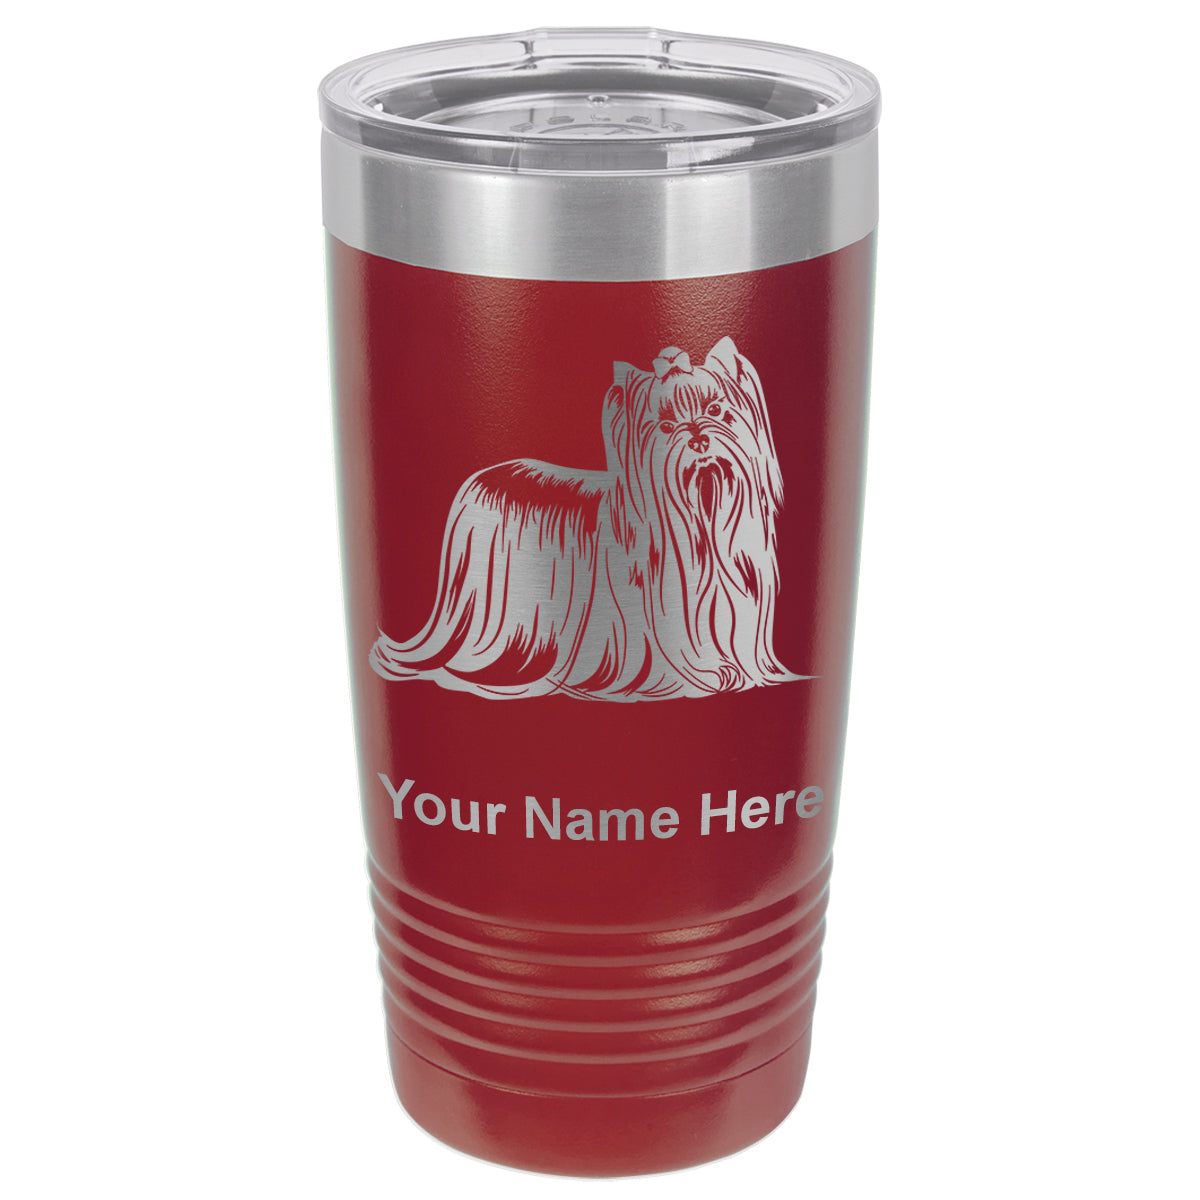 20oz Vacuum Insulated Tumbler Mug, Yorkshire Terrier Dog, Personalized Engraving Included